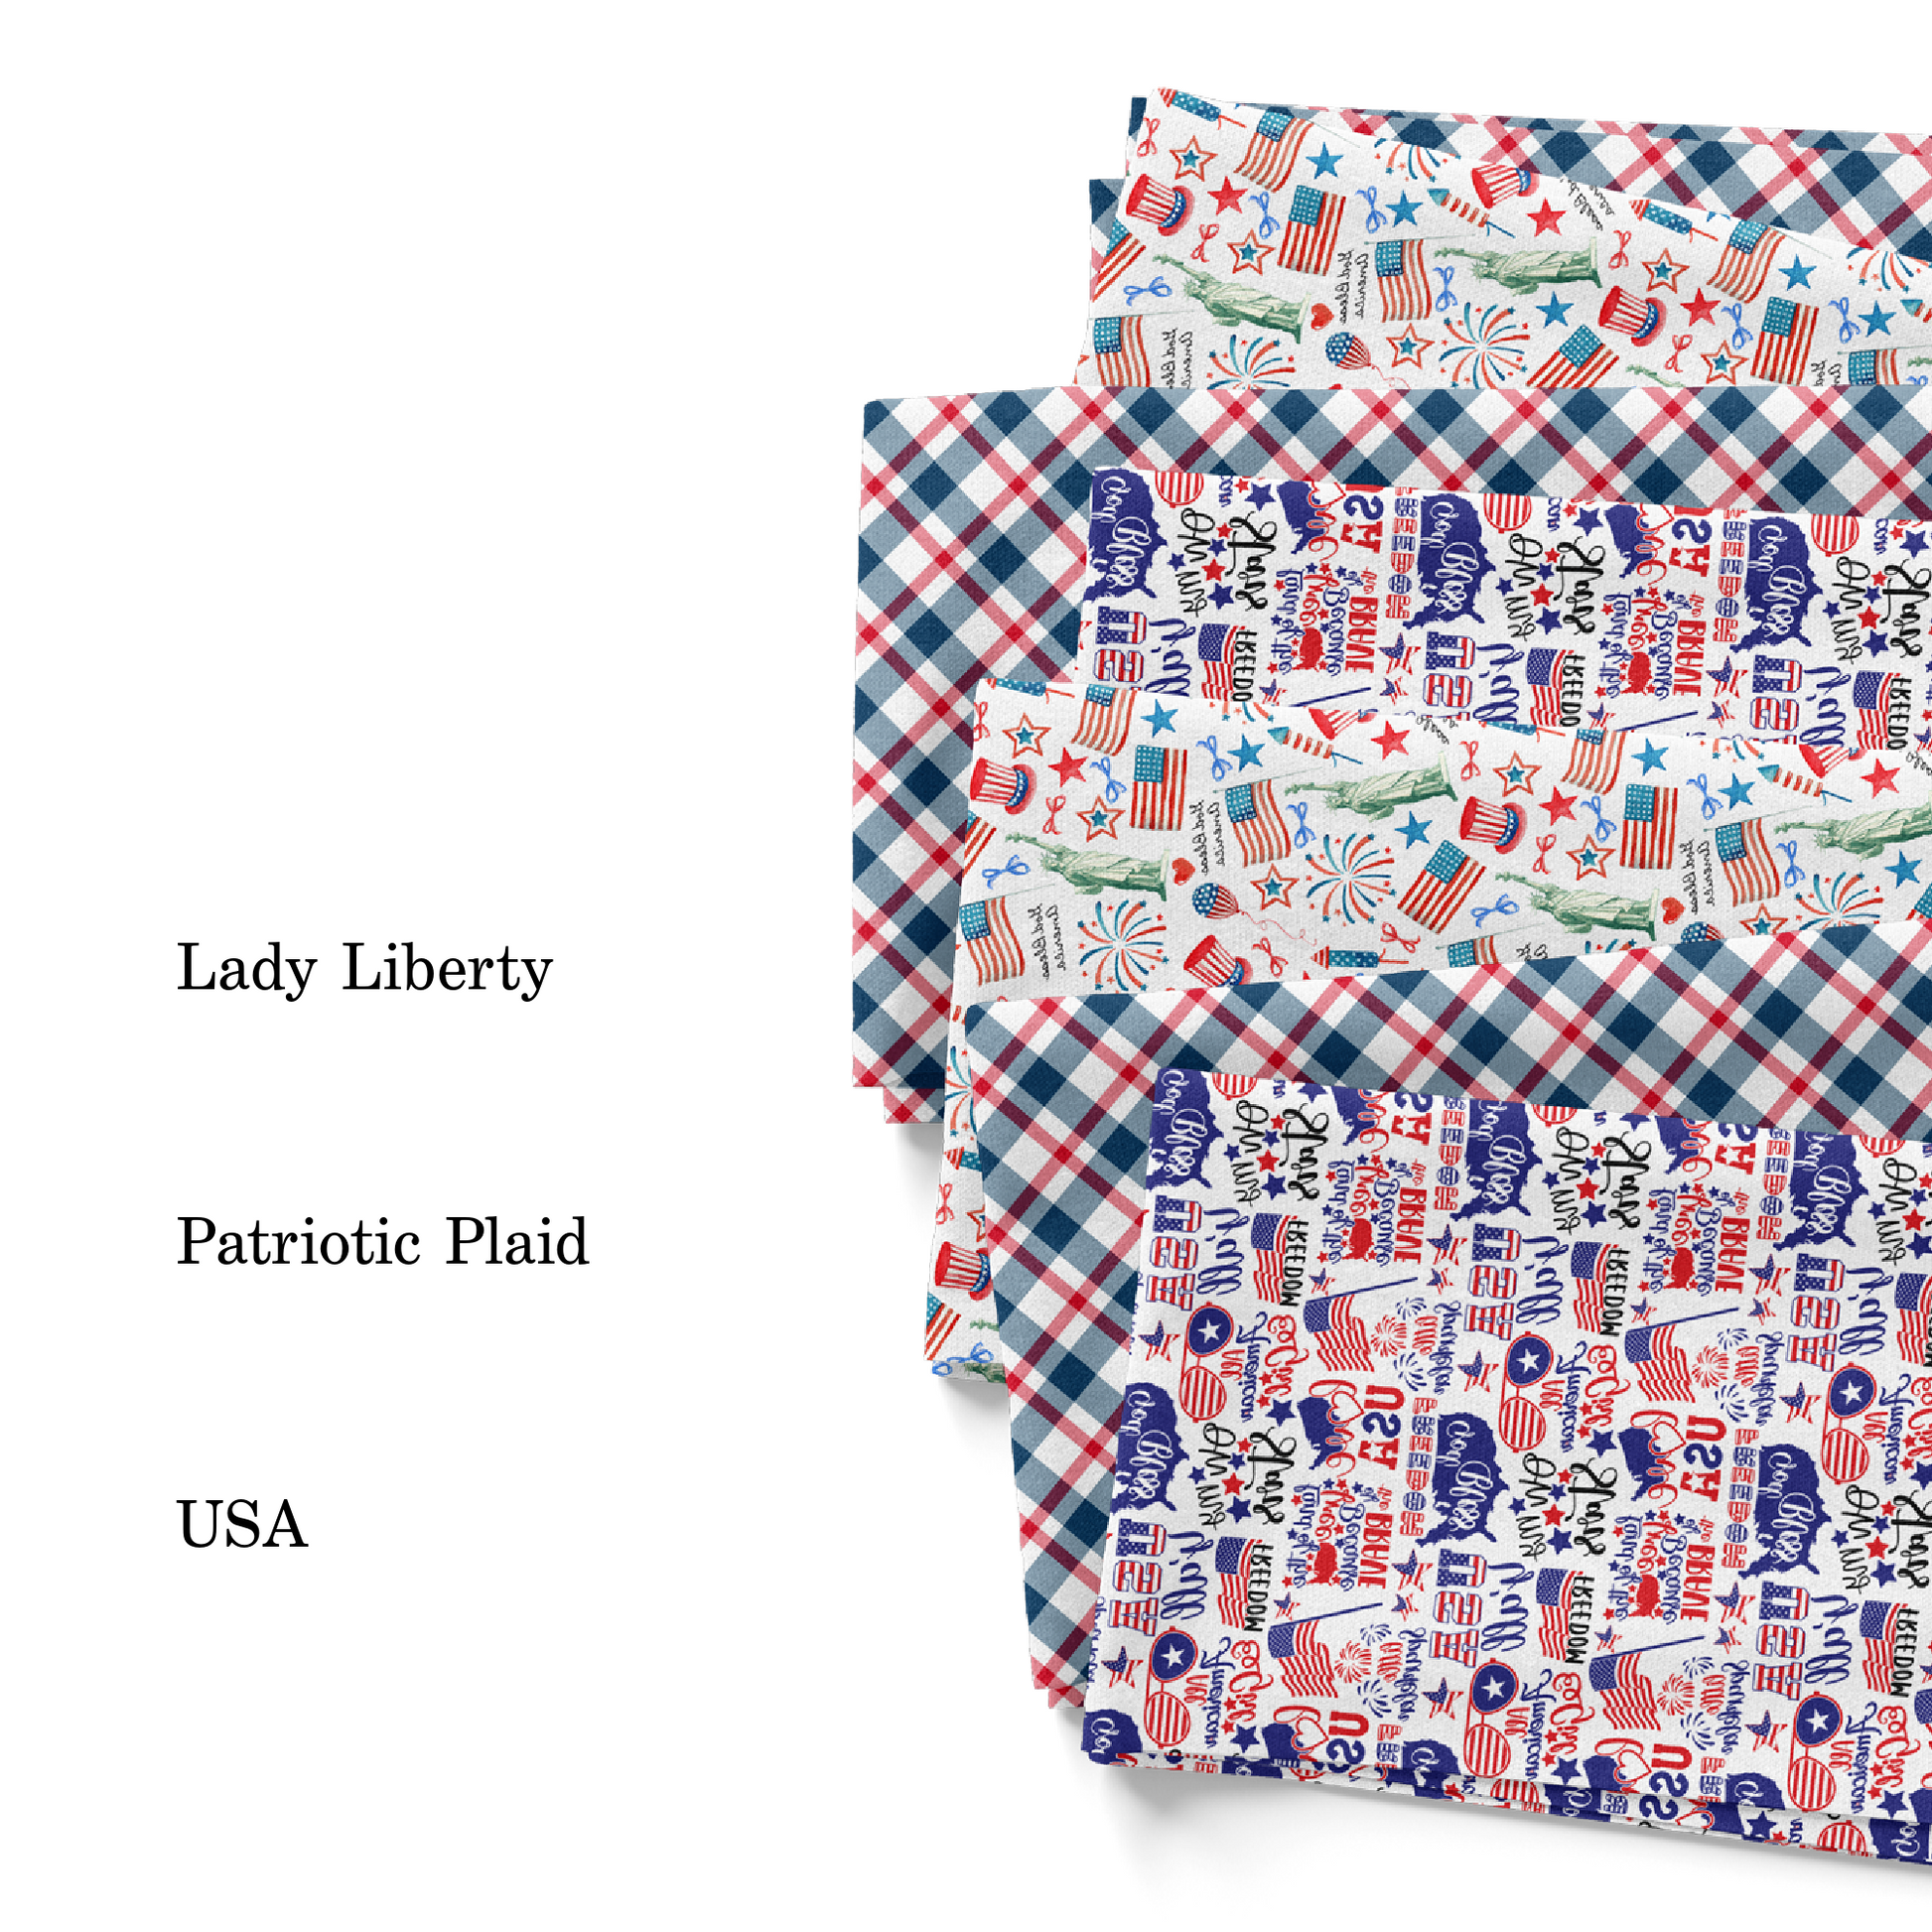 We The People Patriotic Stamps Postage Stamp Cotton Fabric